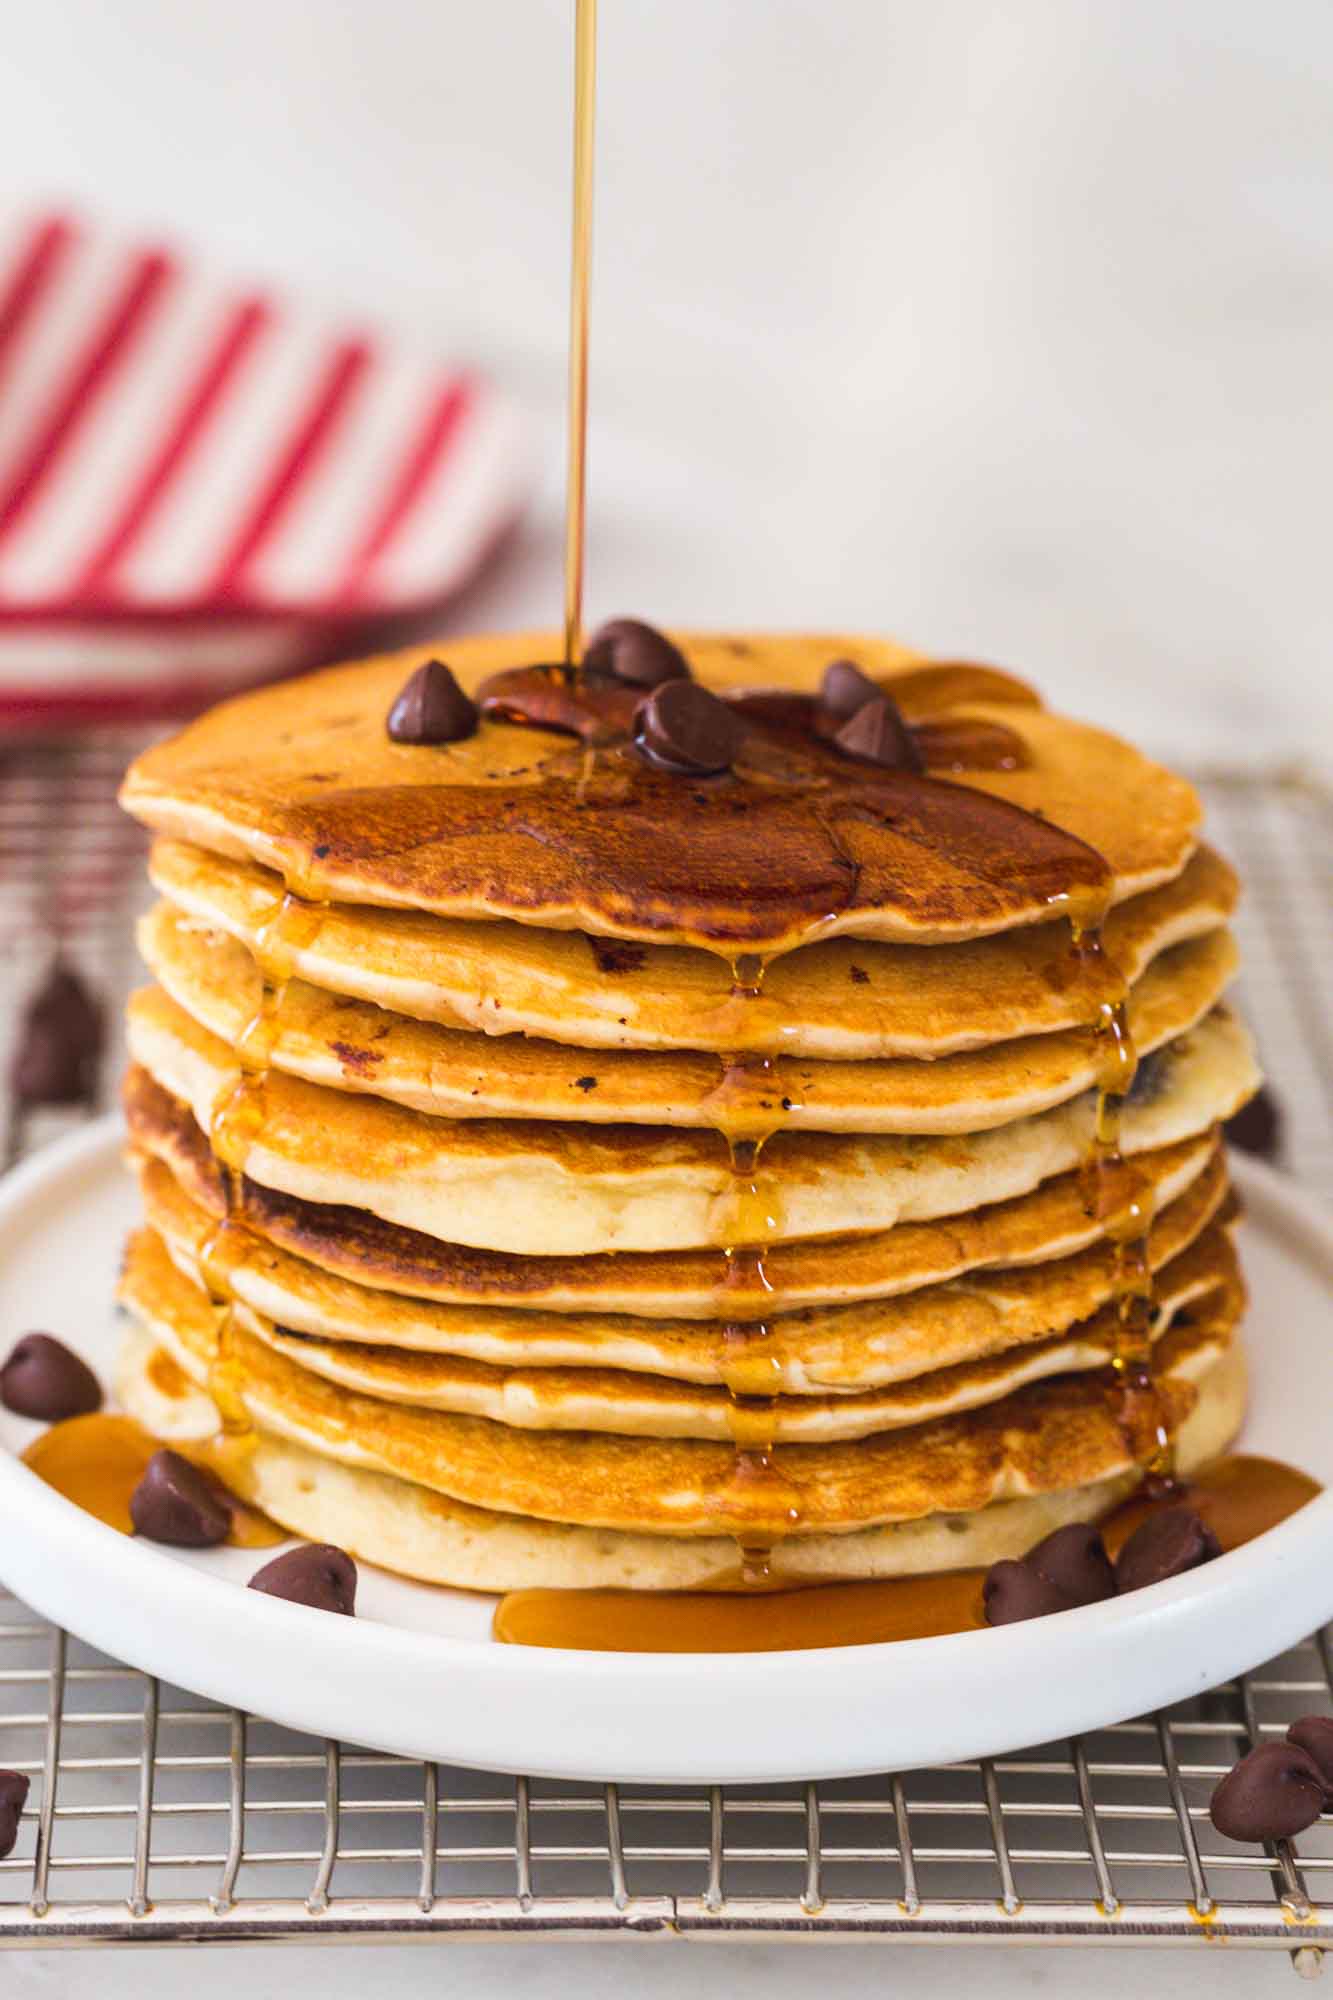 Drizzling pancake syrup over a stack of chocolate chip pancakes